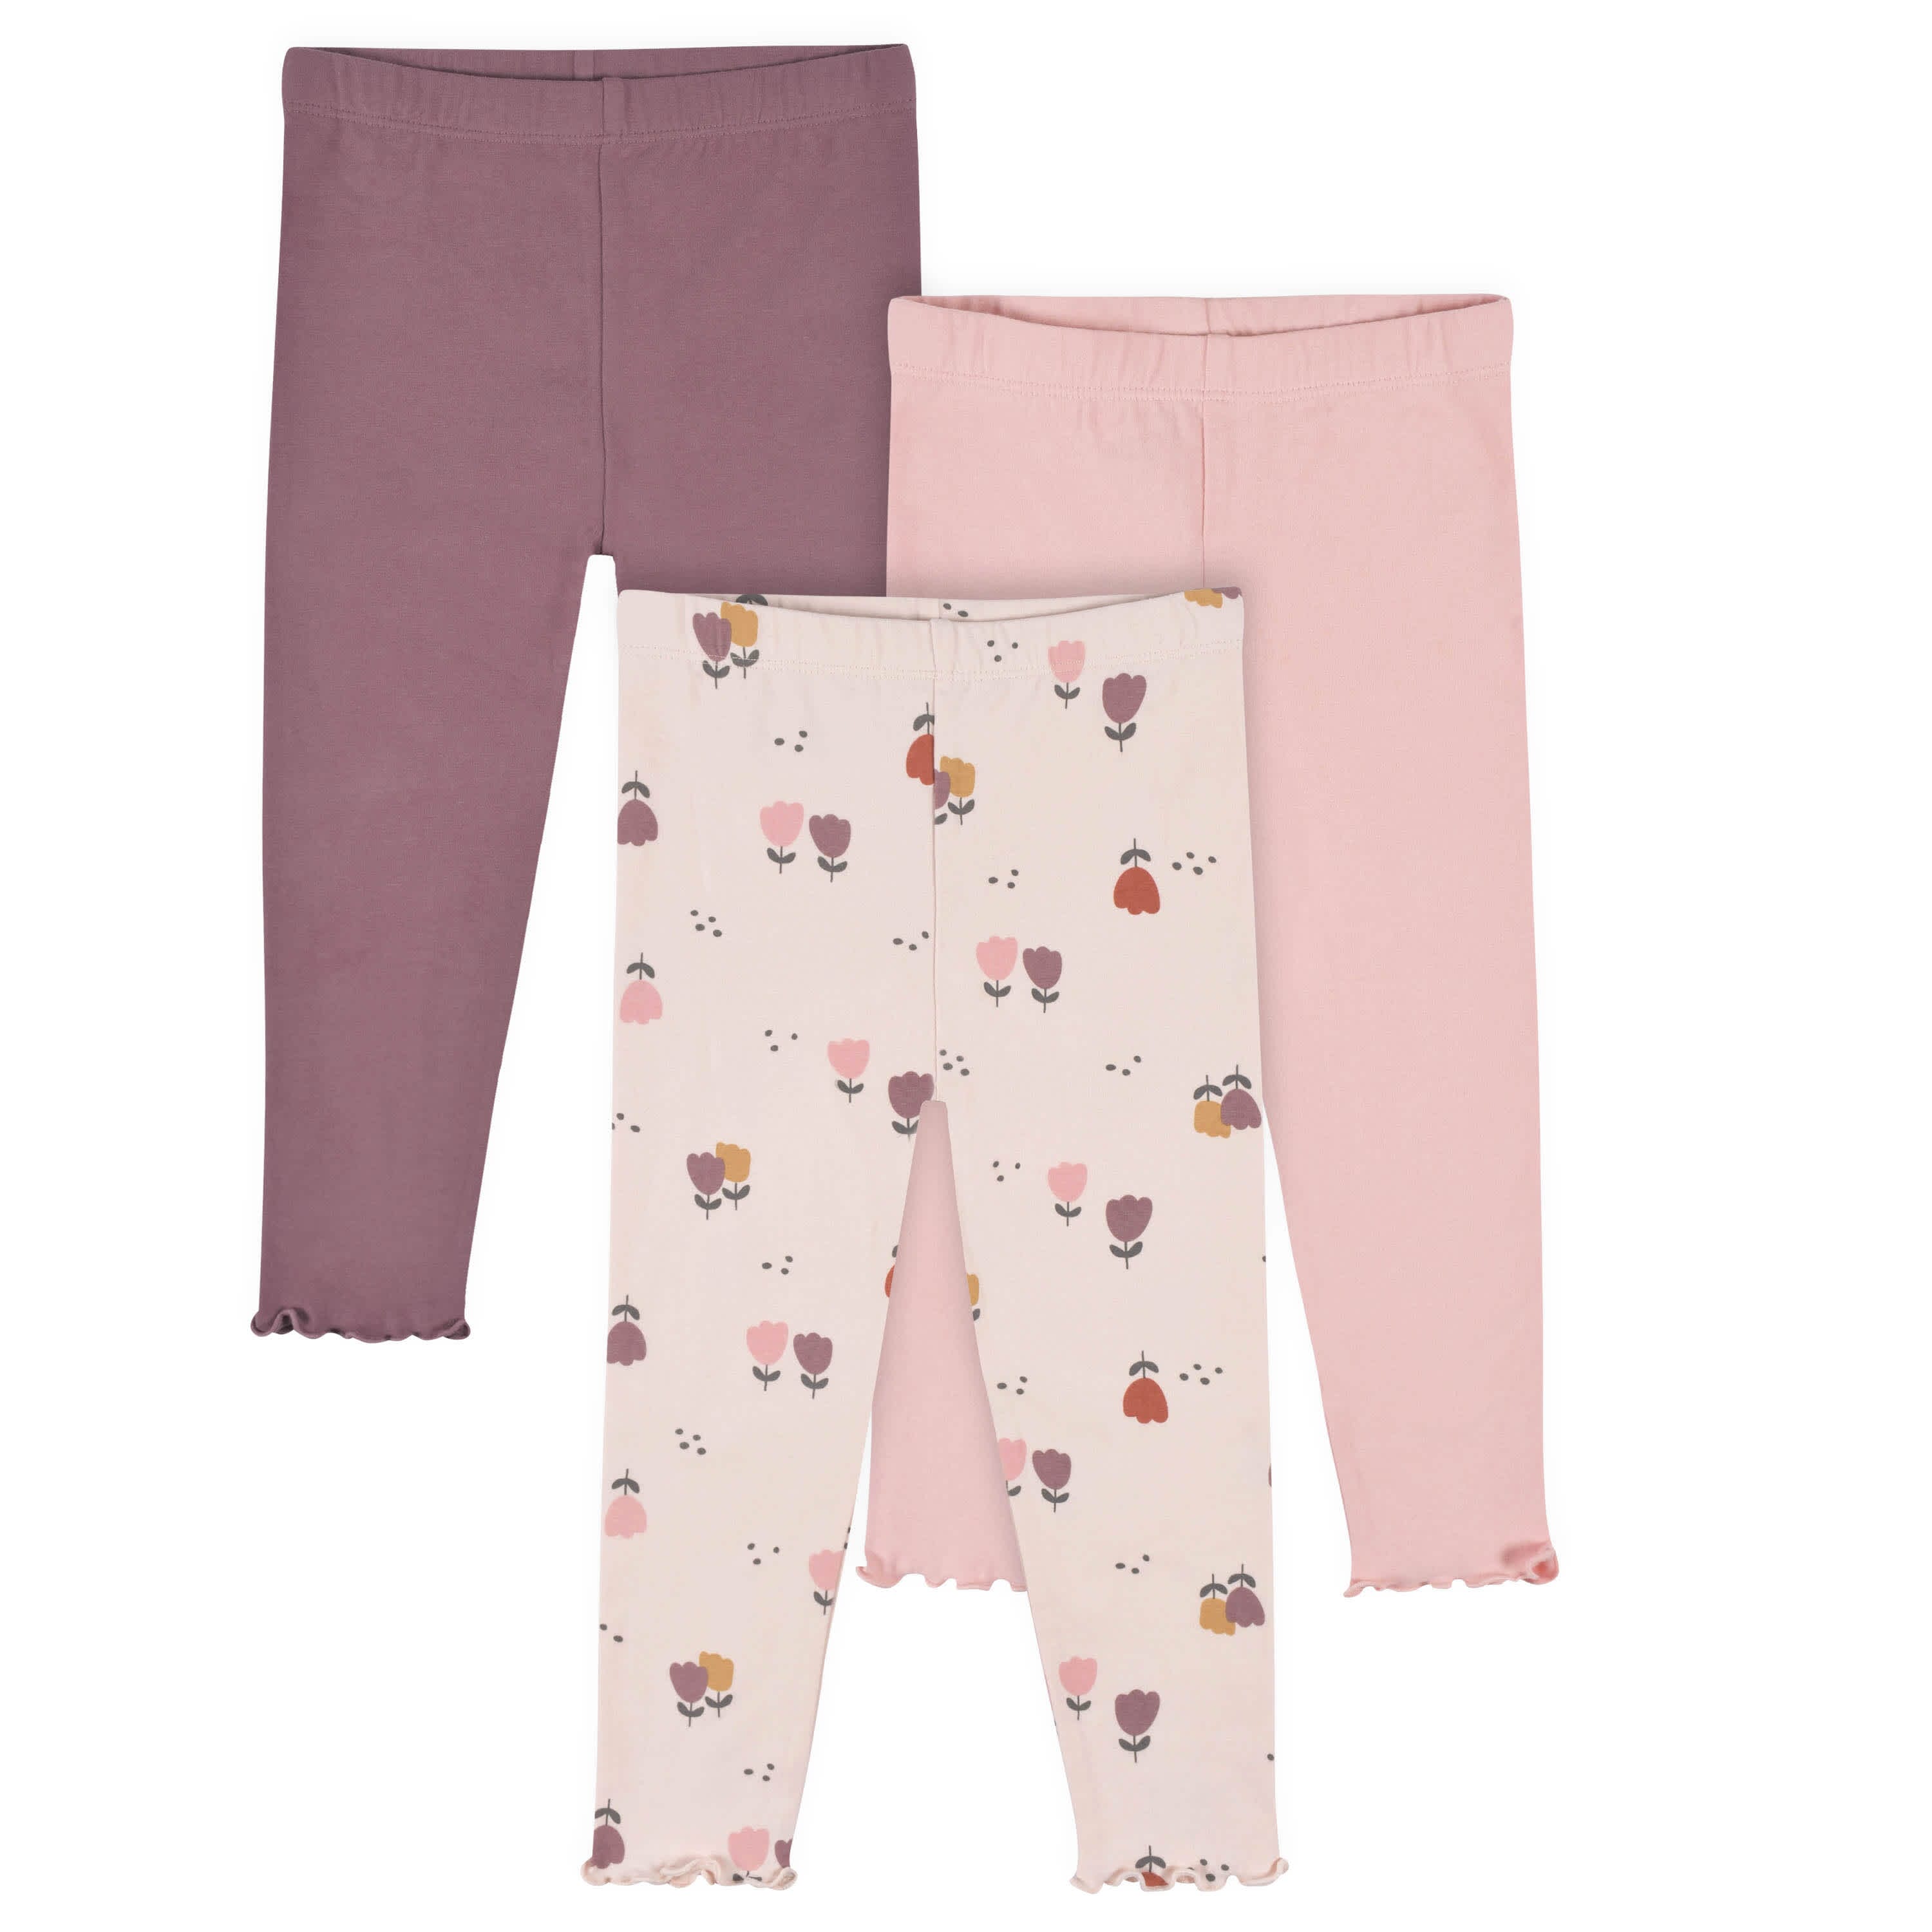 M&S Cotton Floral Draw Cord Leggings, 3 Pack, 0 Months-3 Years